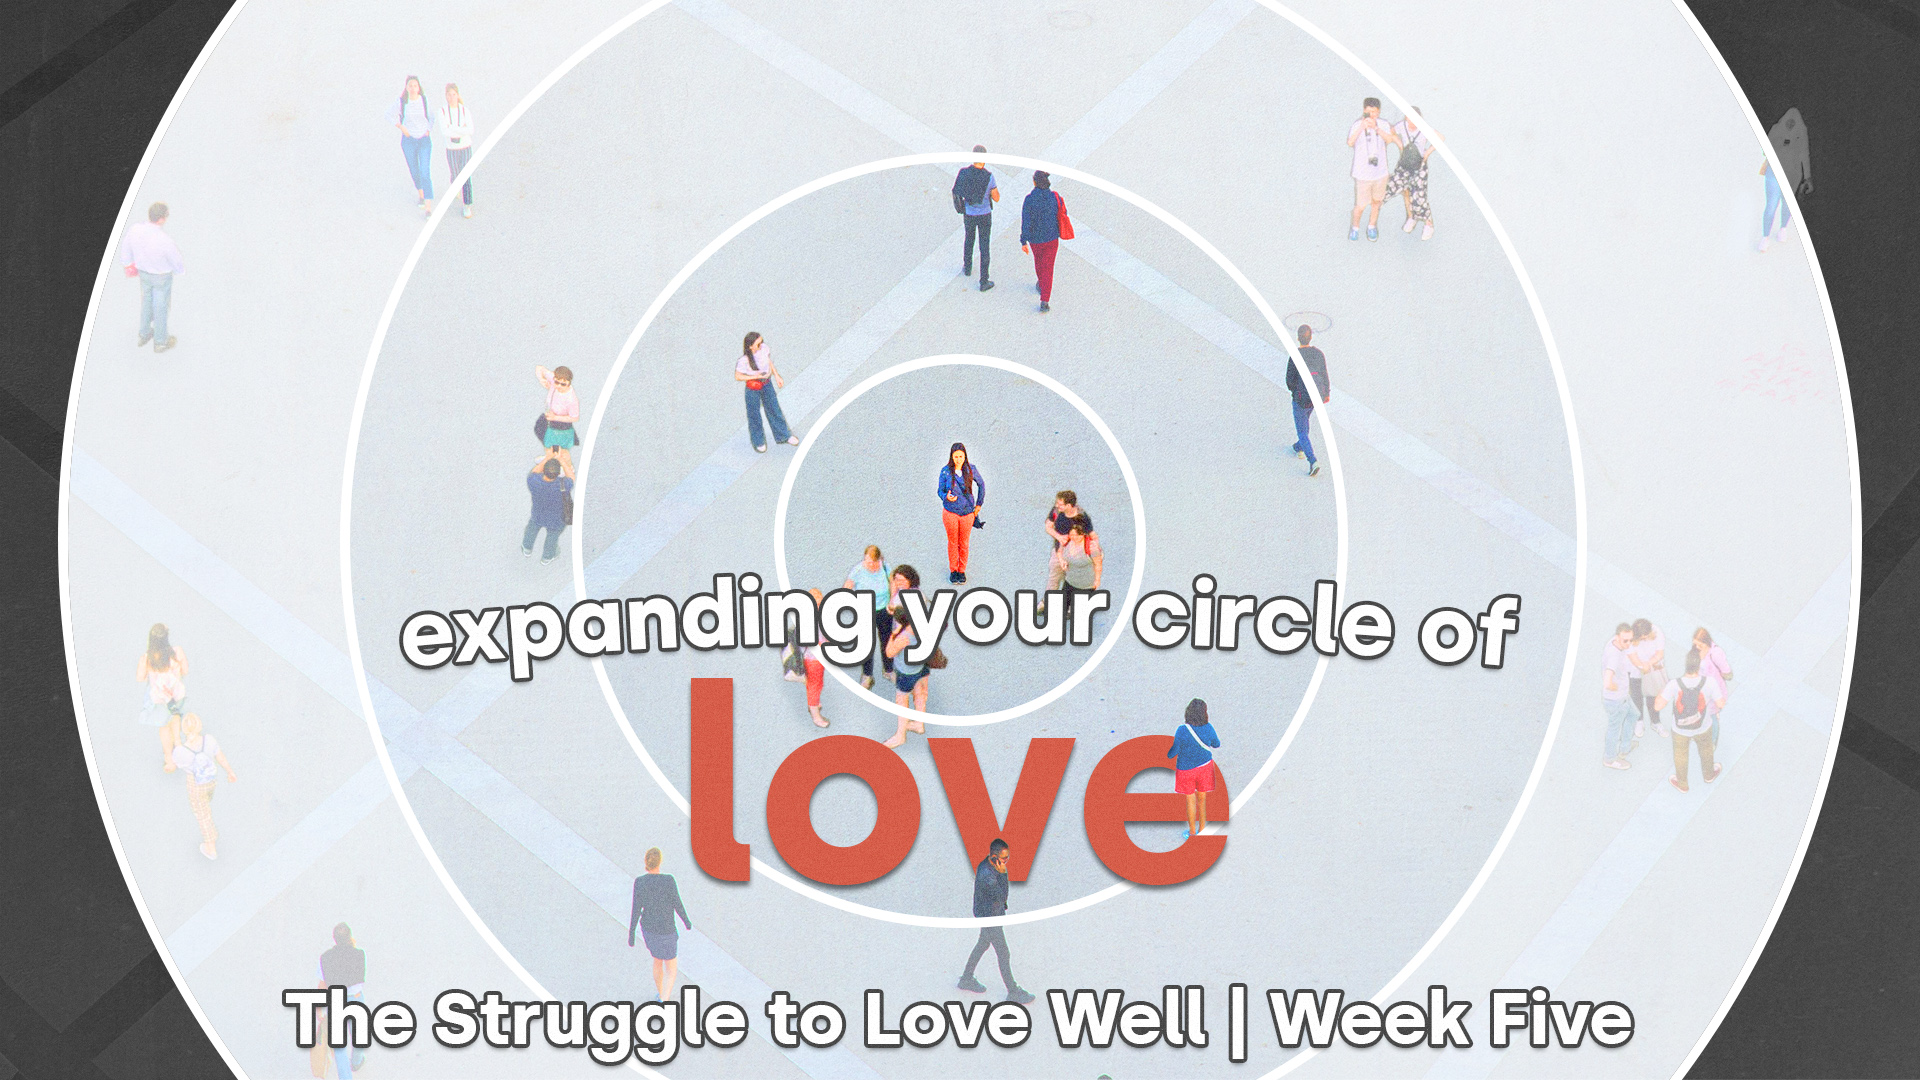 The Struggle to Love Well - Week Five